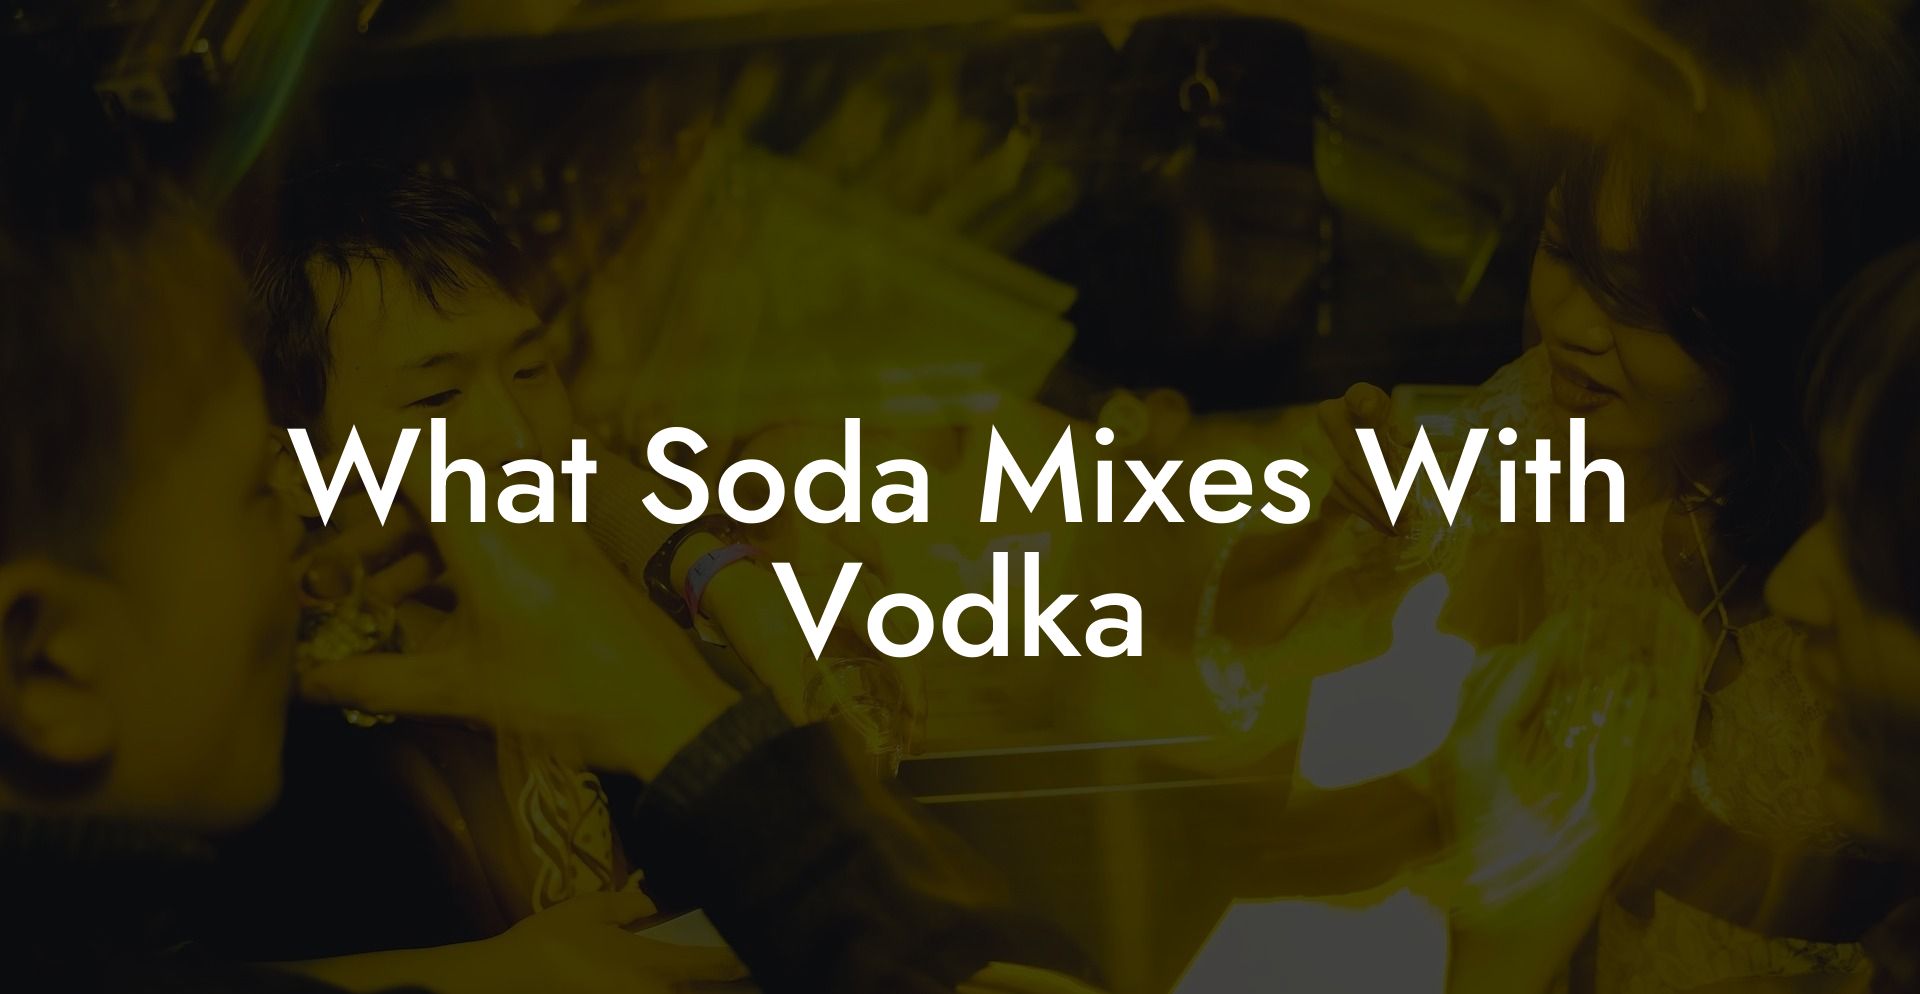 What Soda Mixes With Vodka